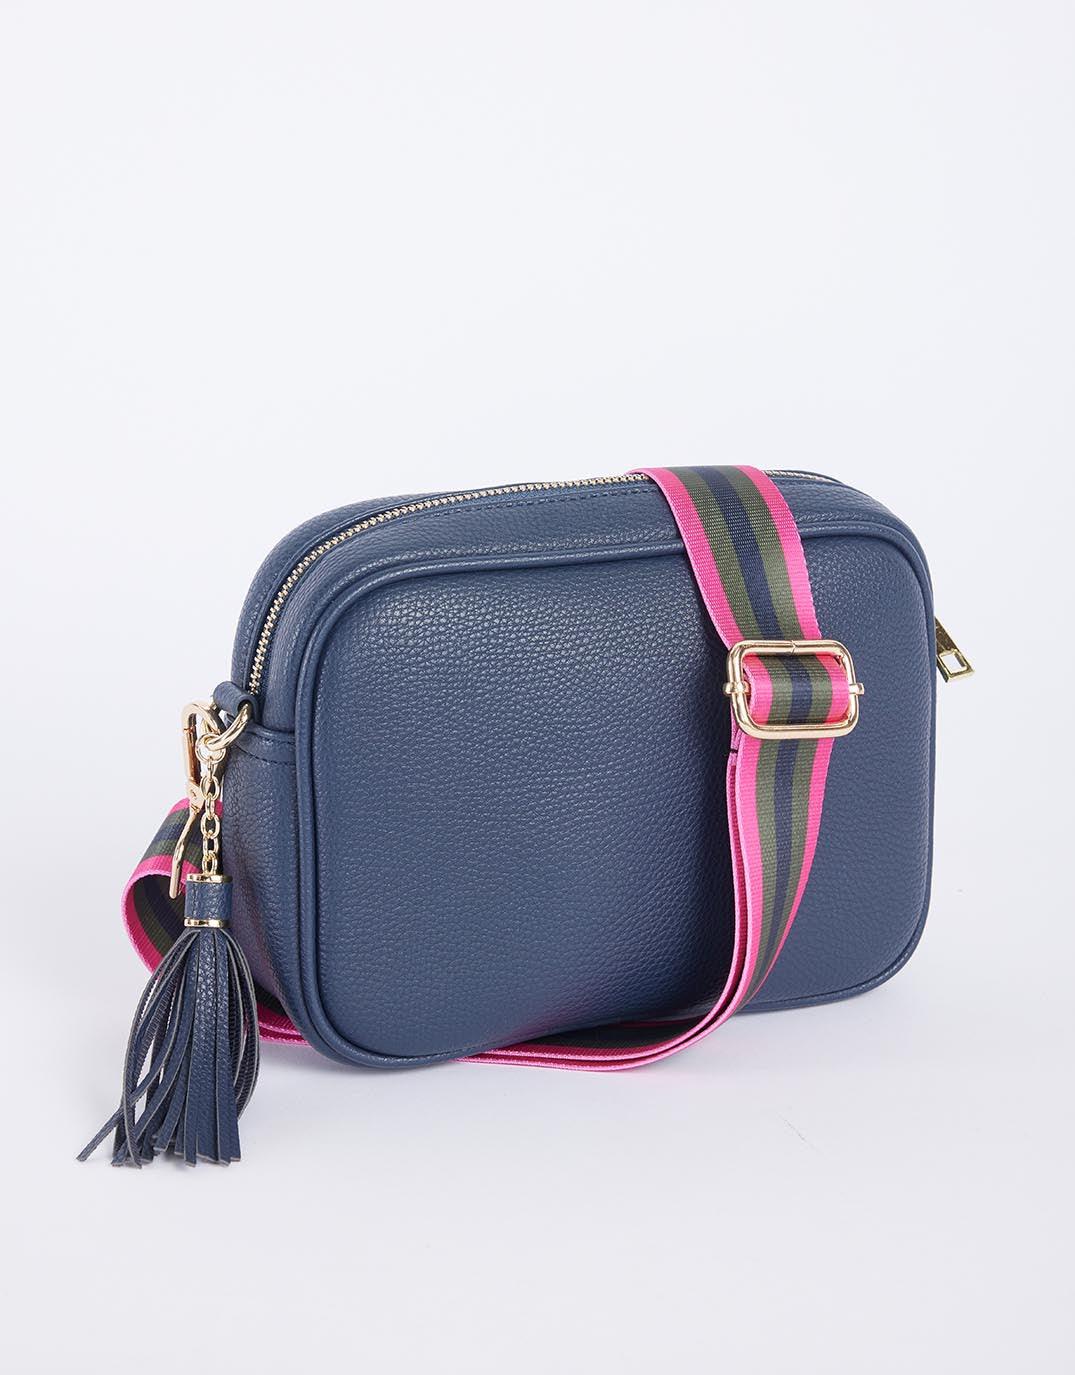 White & Co. - Zoe Crossbody Bag - Navy with Khaki/Hot Pink Stripe - White & Co Living Accessories